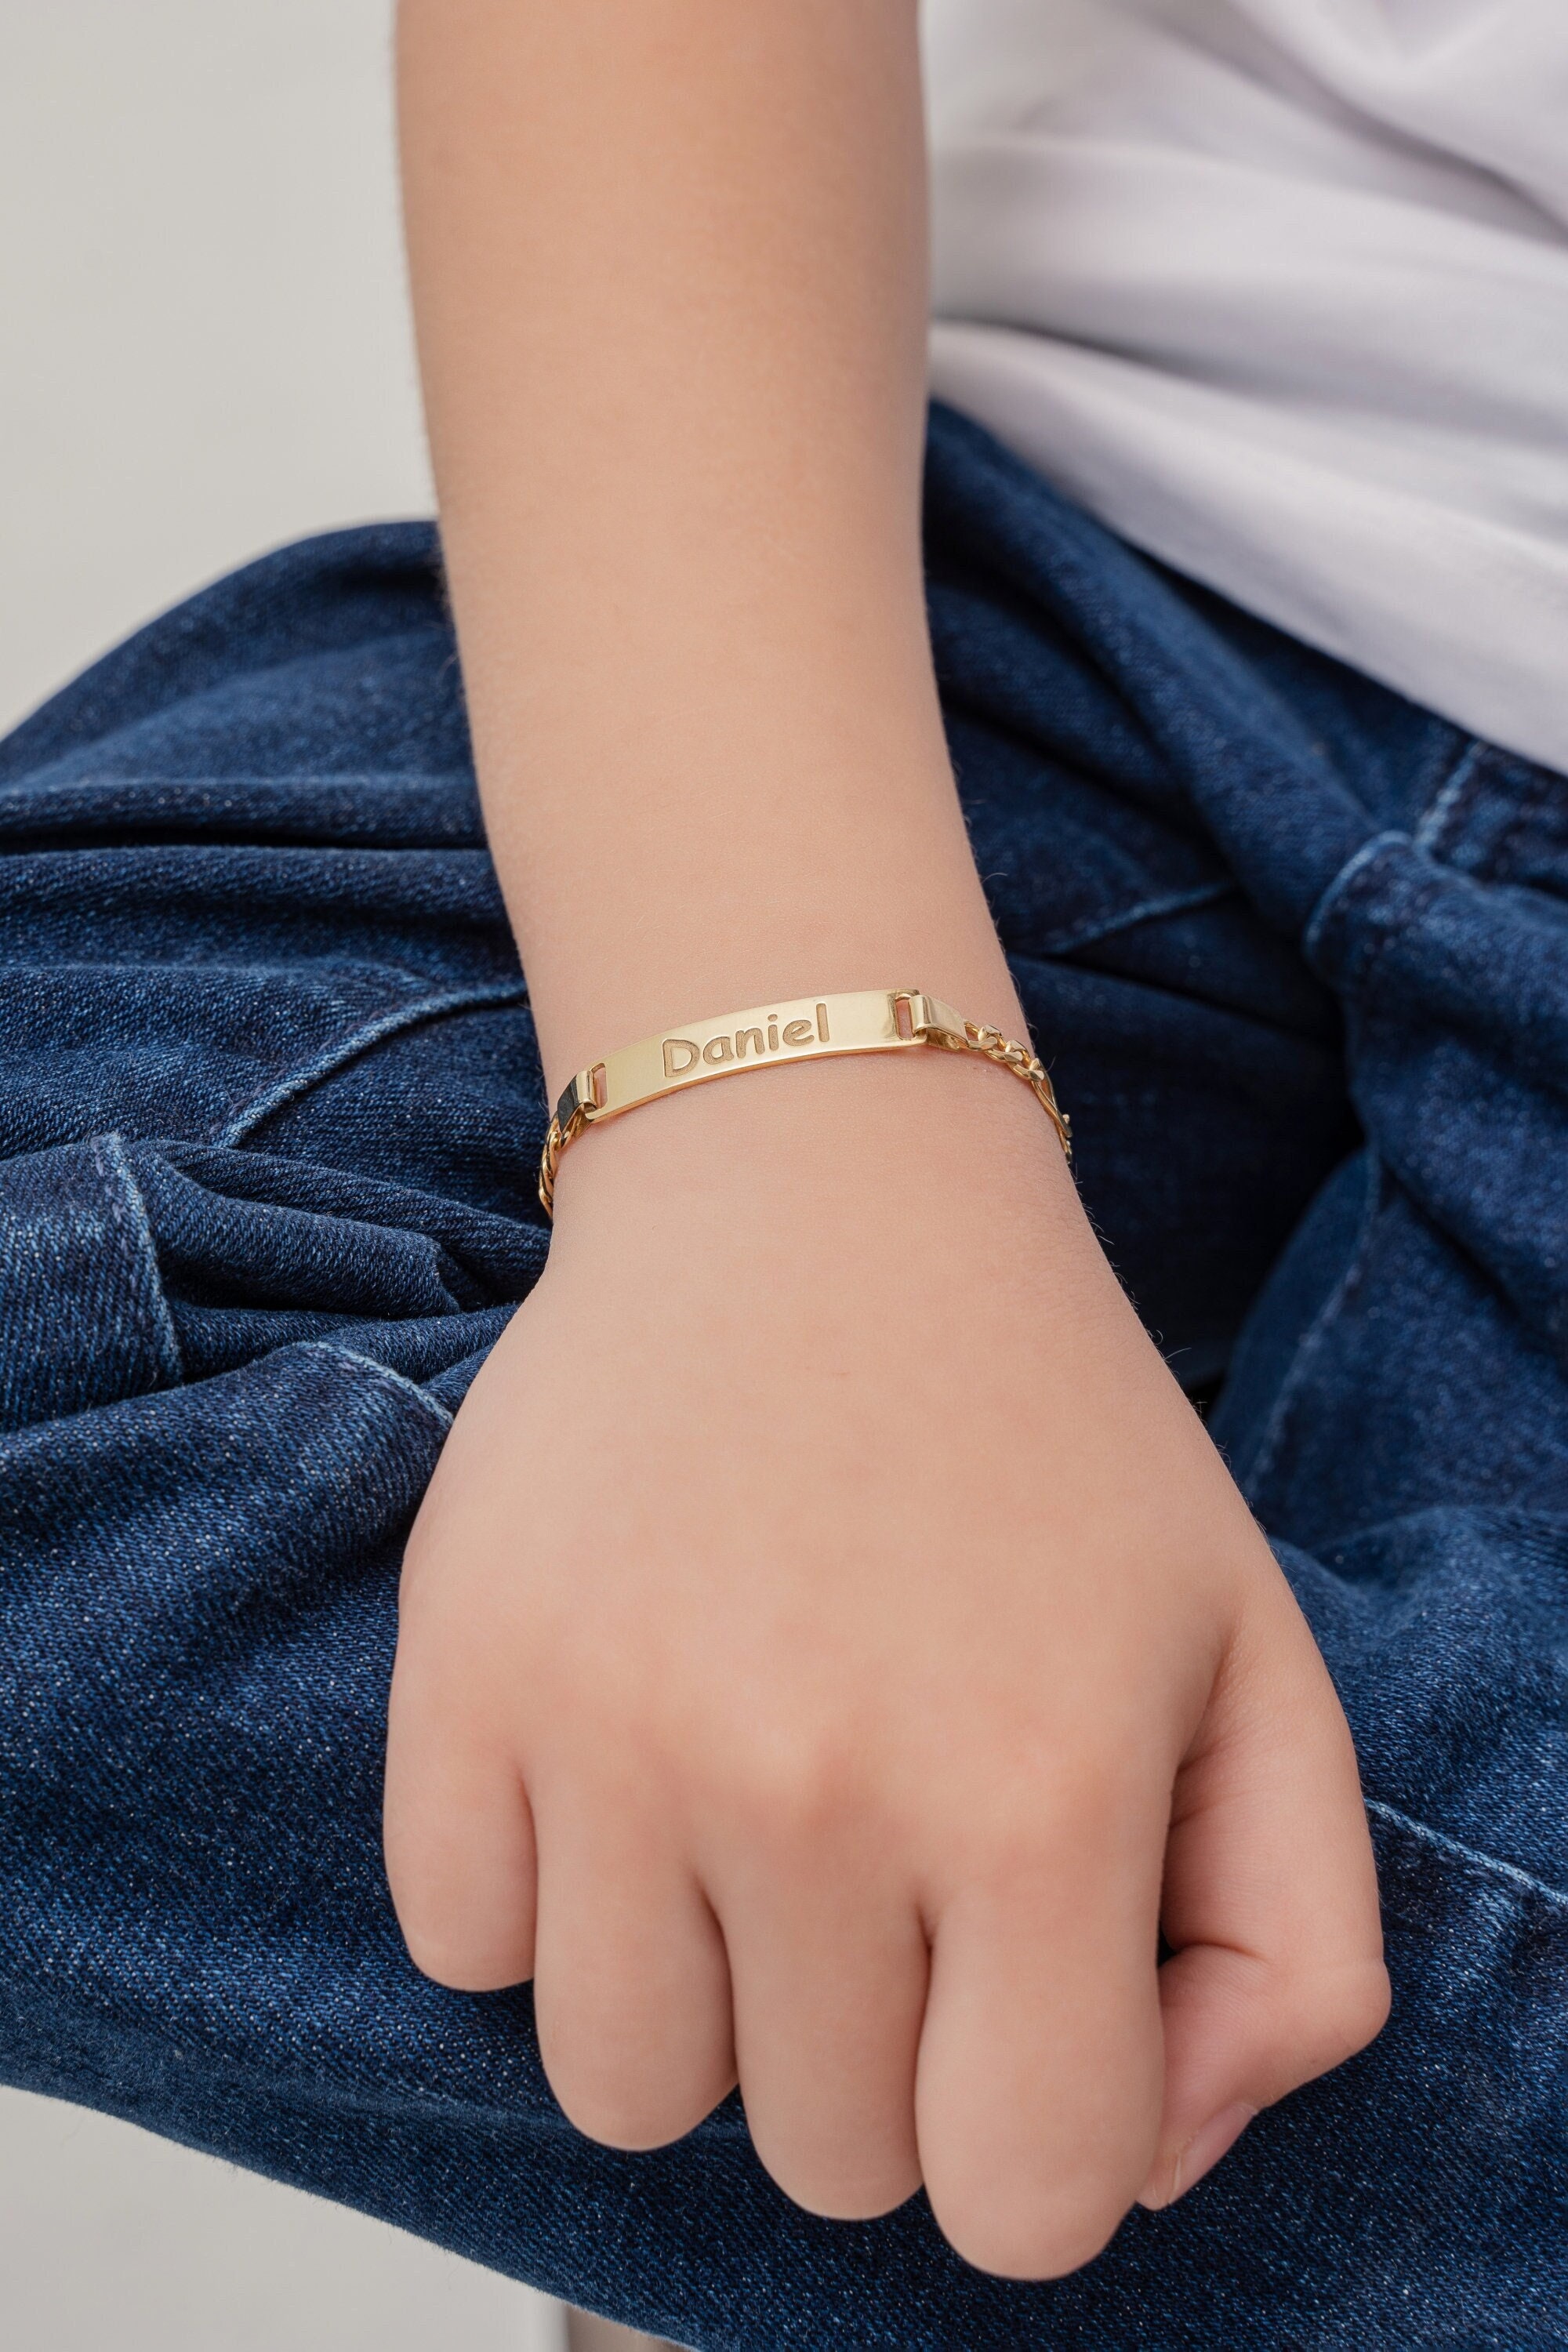 Twisted Cable Magnetic Bracelet Cuff (Gold)